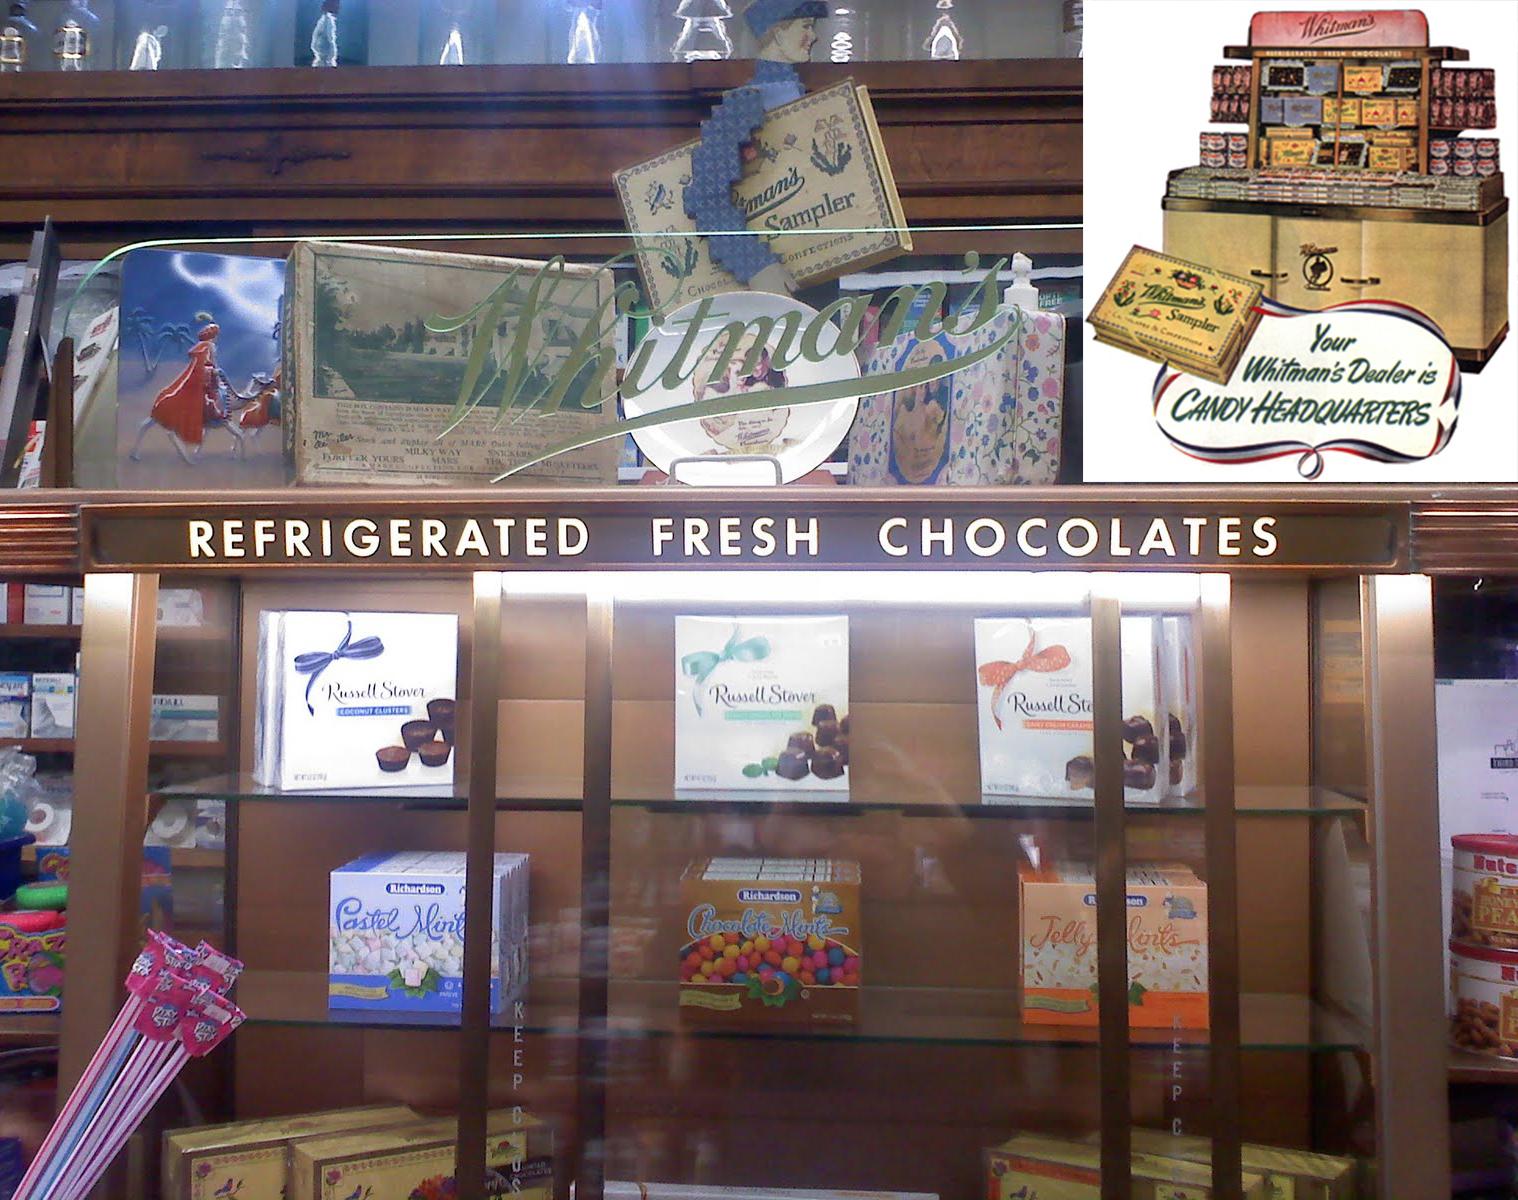 1940s American Whitman’s Chocolate Refrigerated Display Shop Counter Sweet Shop 7